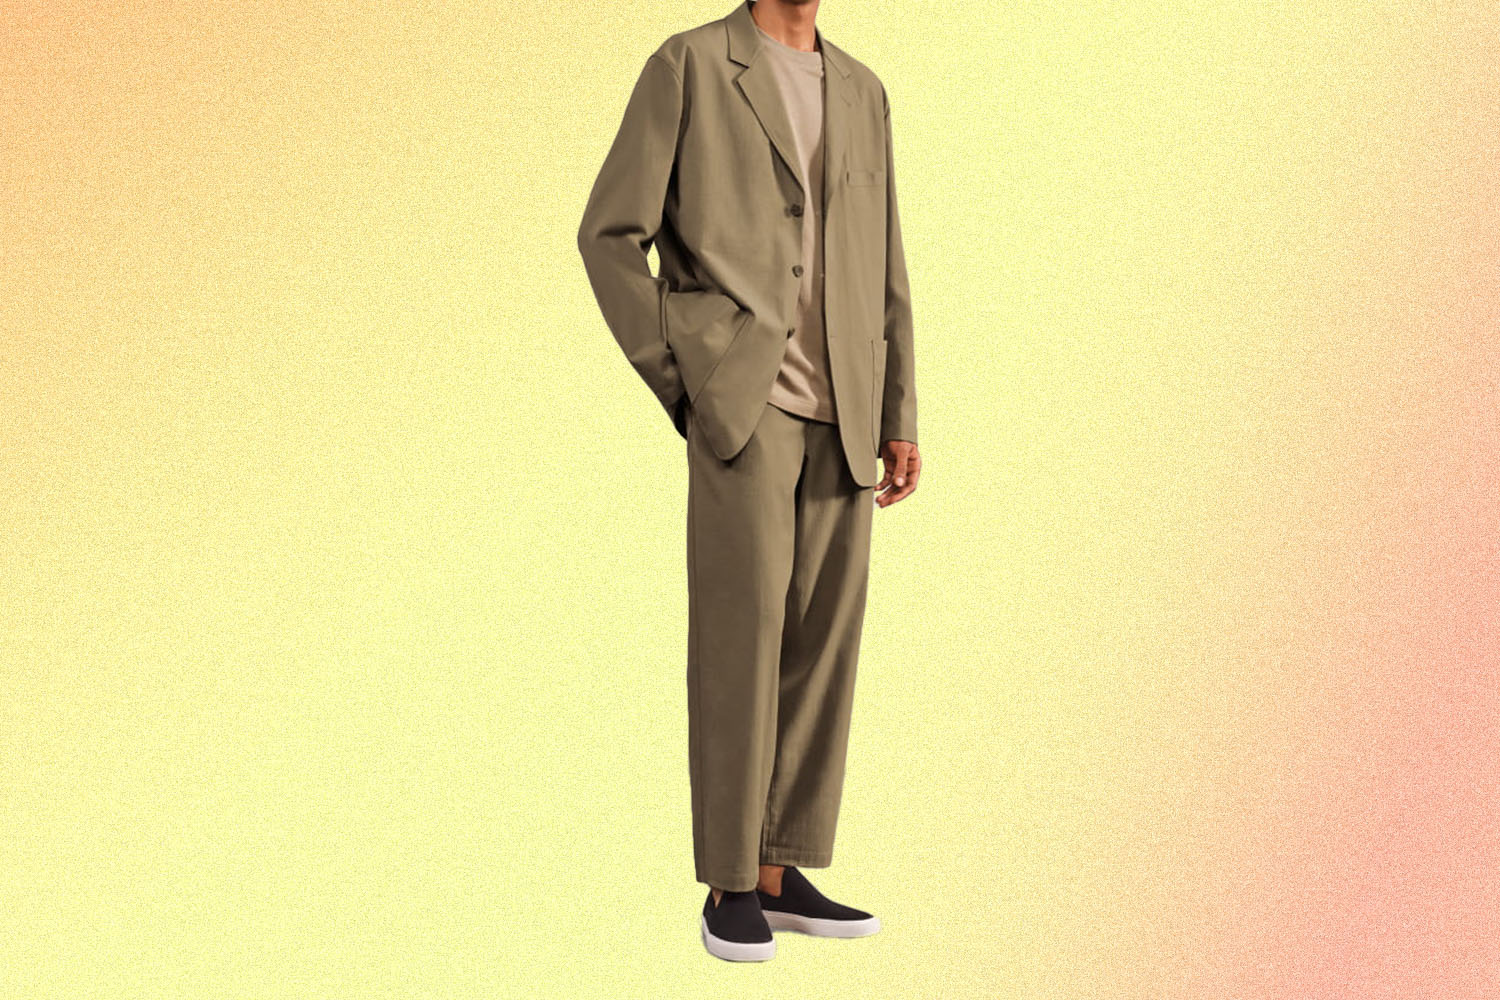 A model in a beige suit on a yellow background